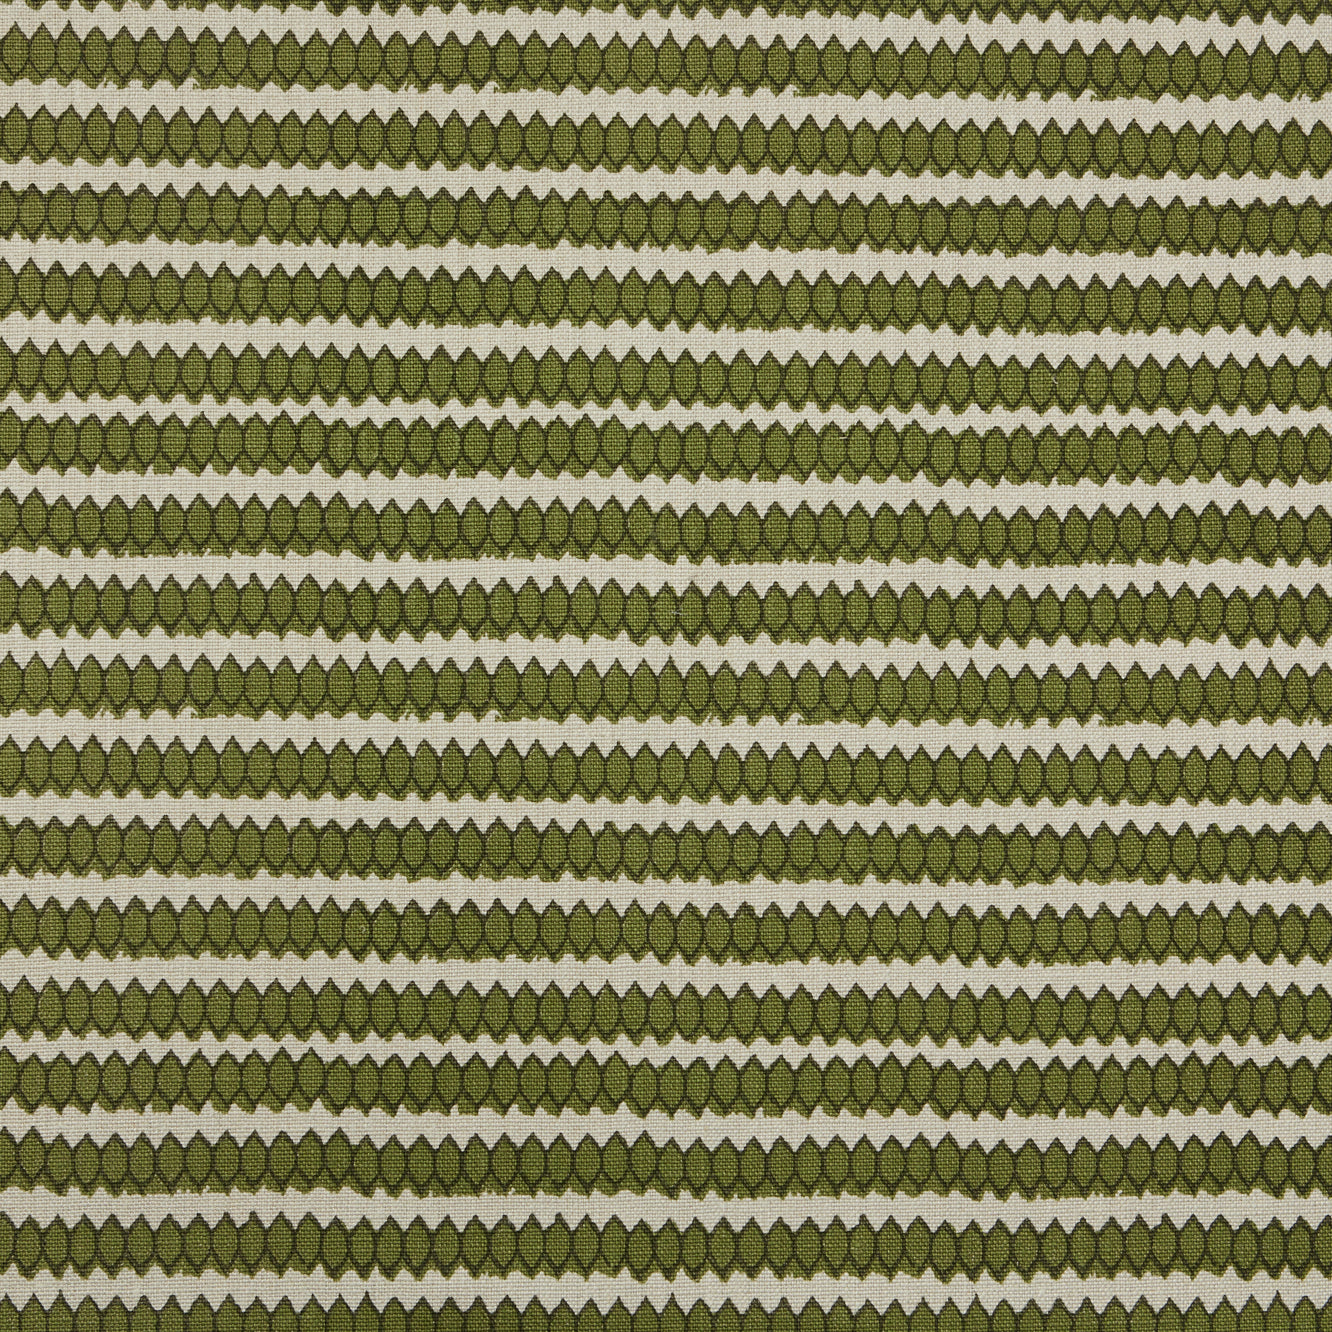 Swatch of fabric with rows of hand-drawn green and olive honeycomb shapes on a cream background.